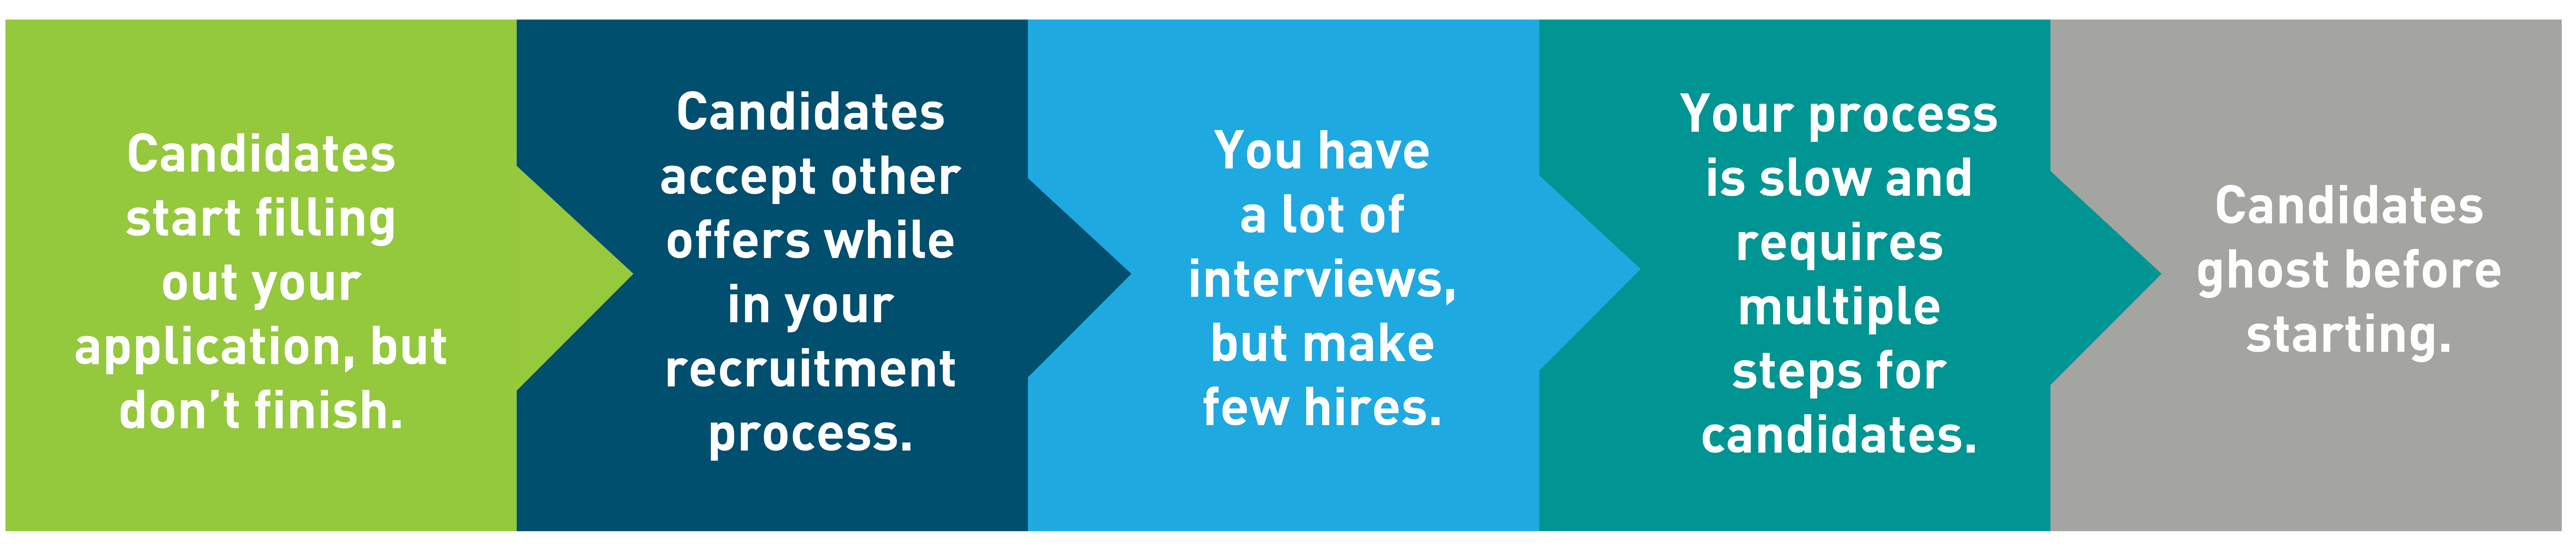 Candidates accept other offers while in your recruitment process. 
You have a lot of interviews, but make few hires. 
Your process is slow and requires multiple steps for candidates.
Candidates ghost before starting